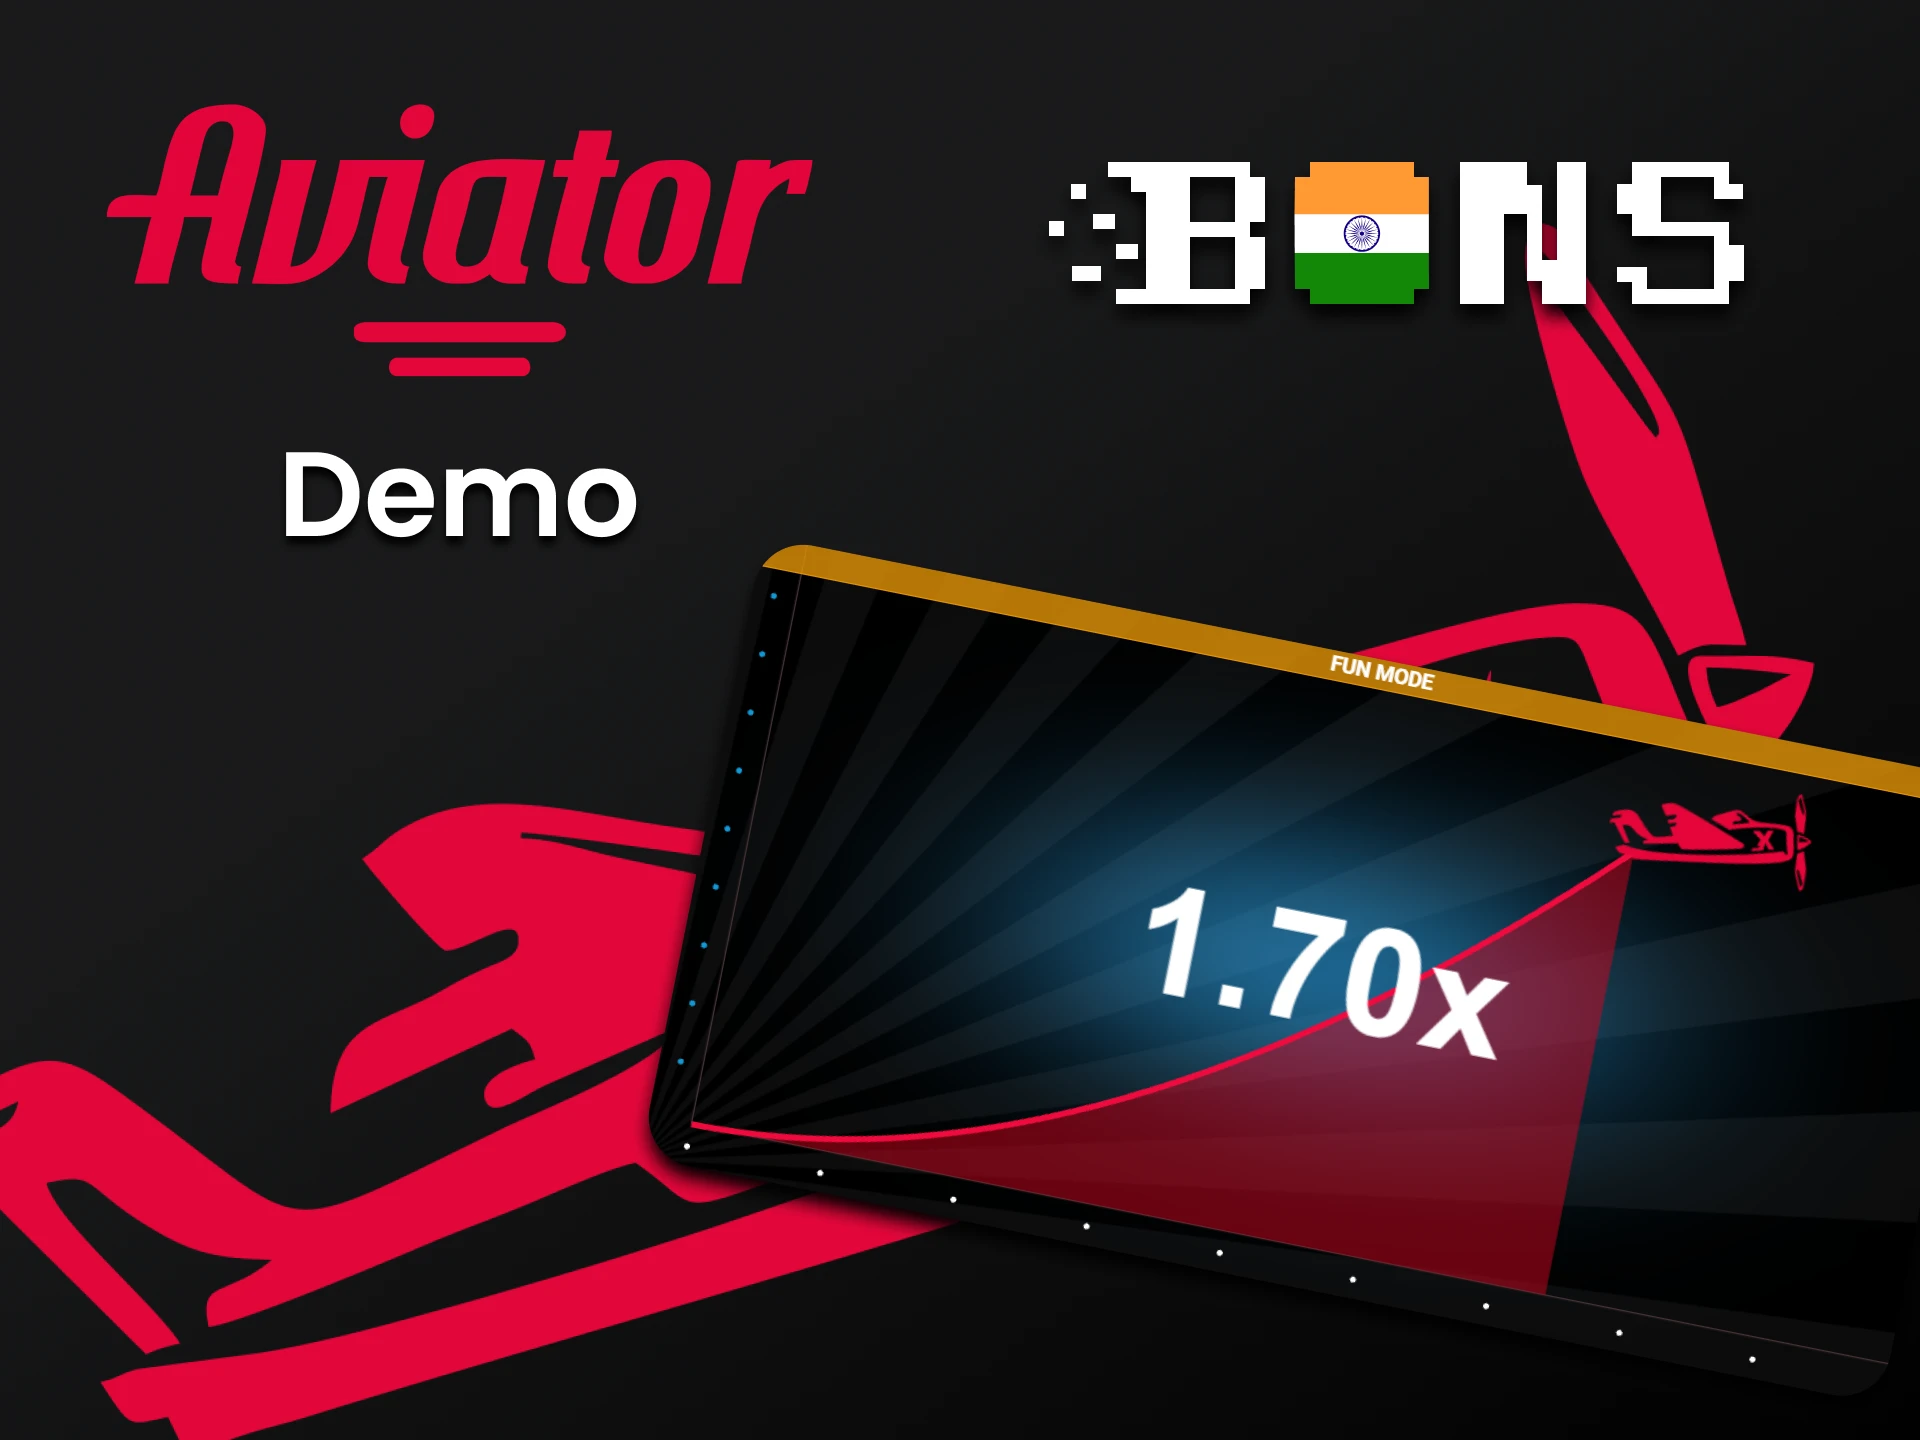 There is a demo version of Aviator on Bons.